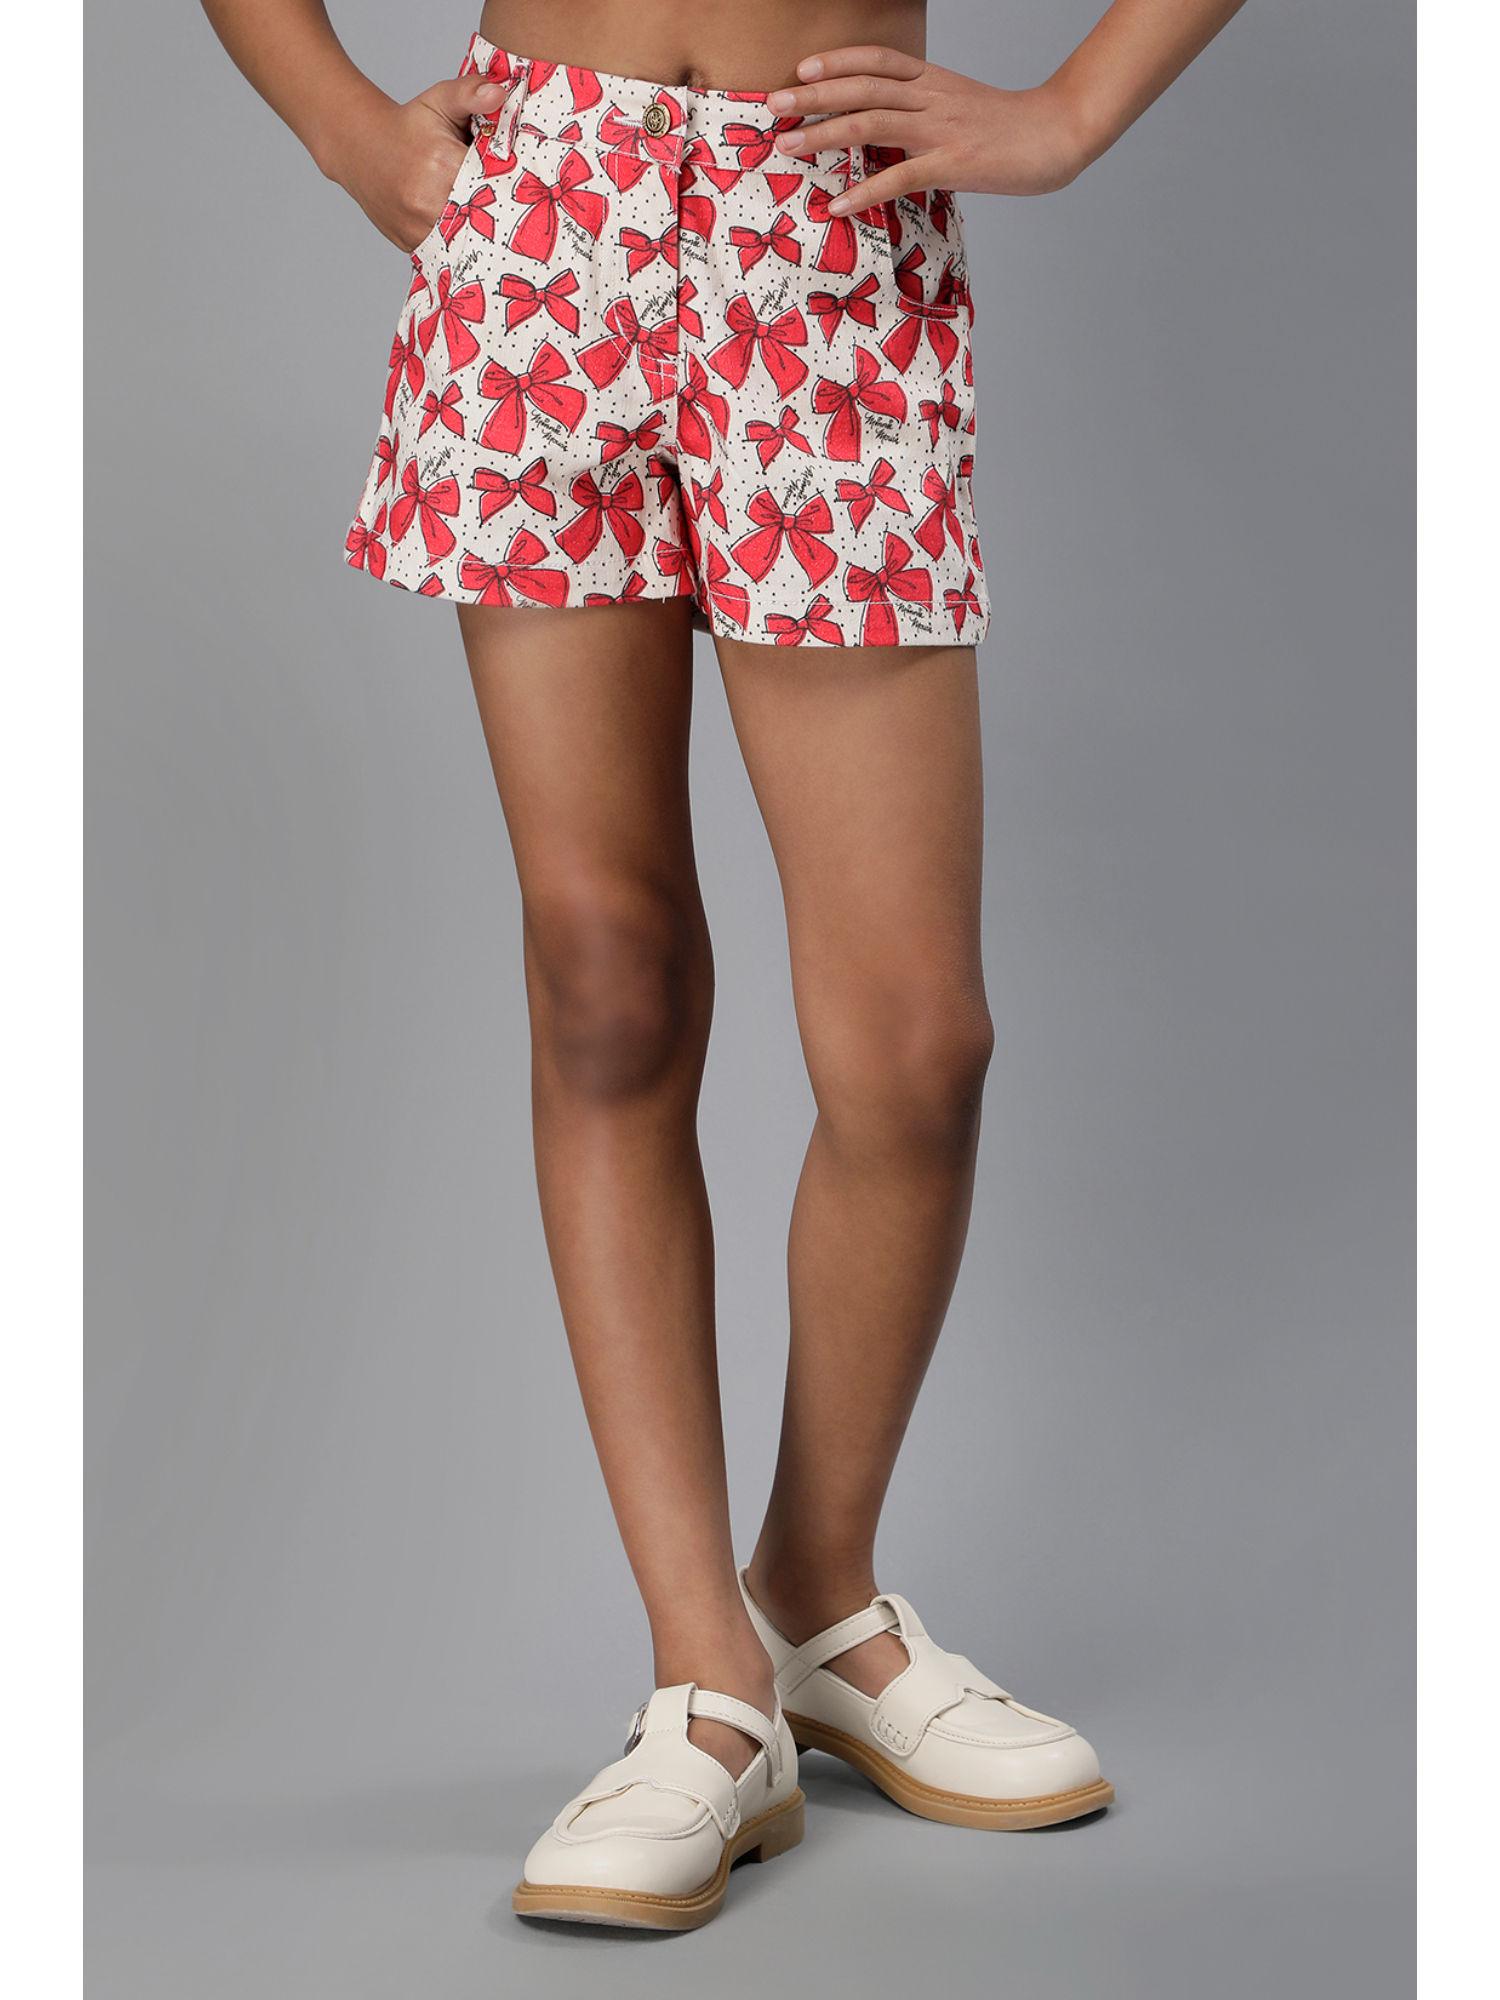 girls red & white bow printed cotton short